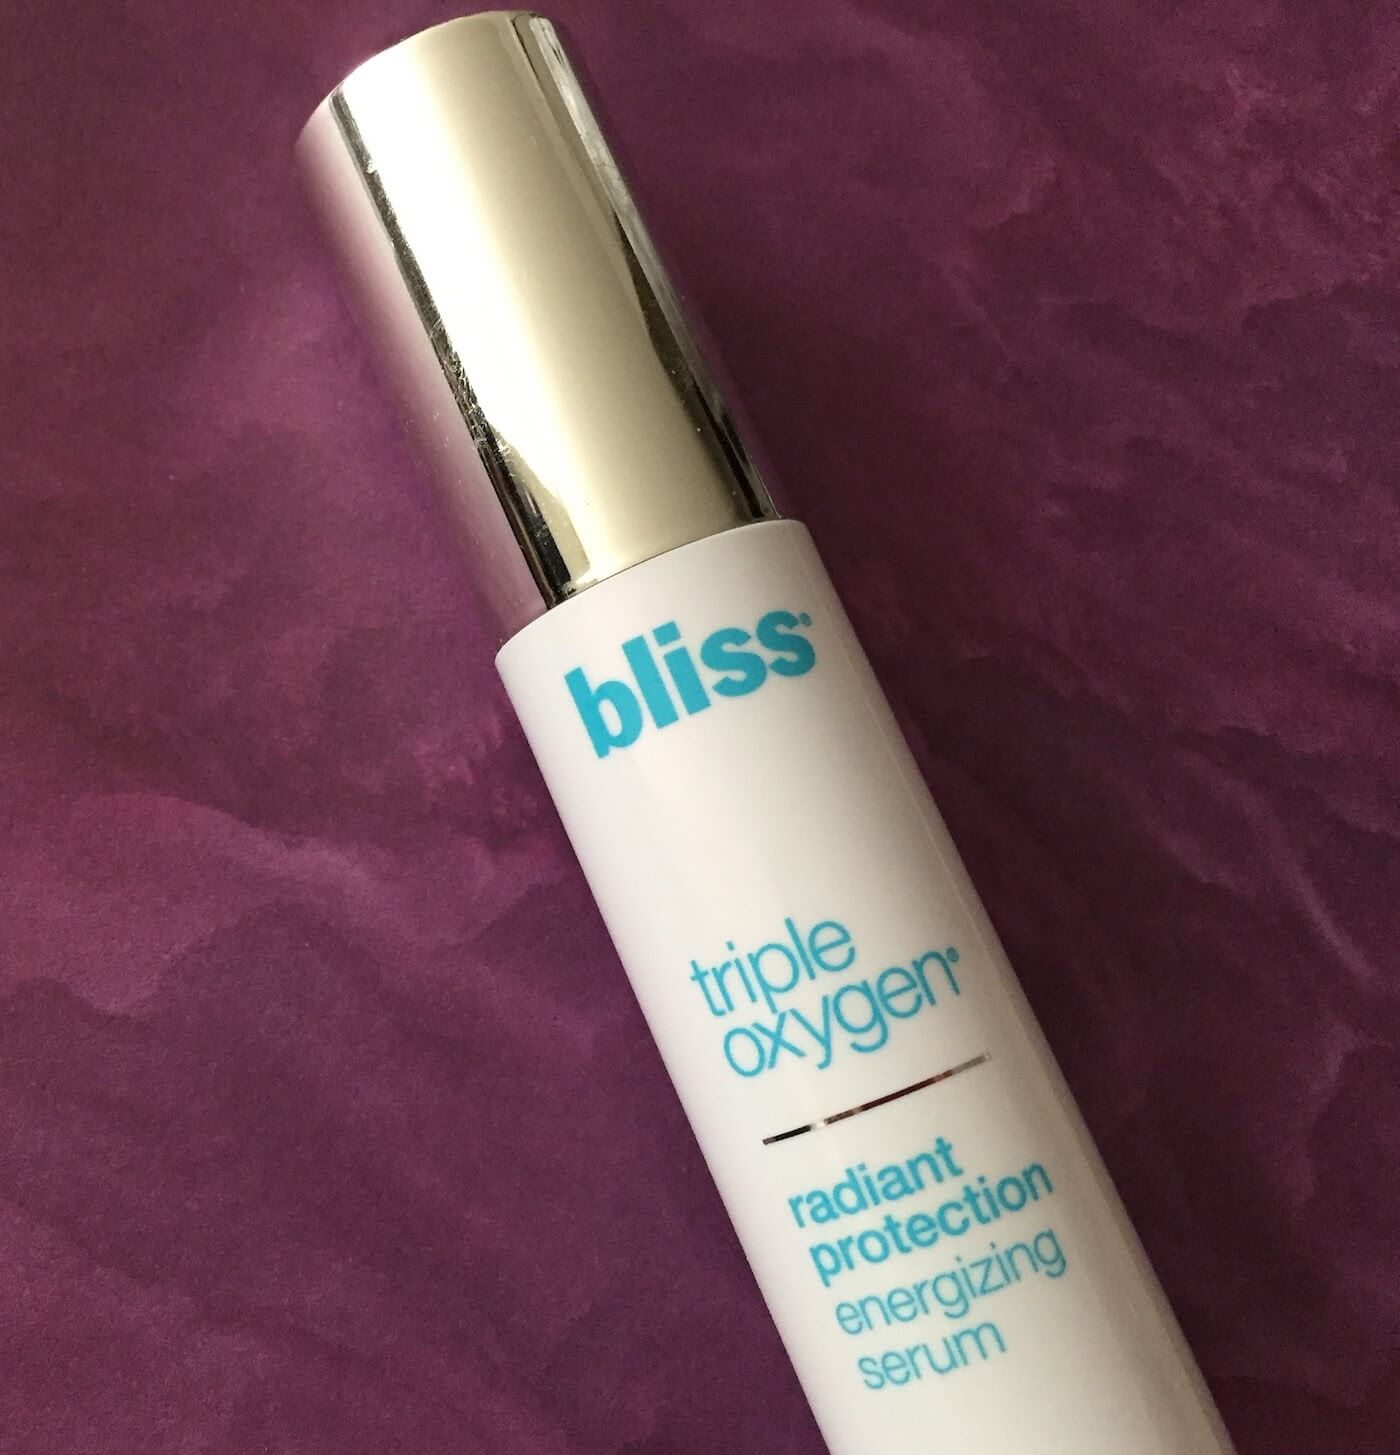 Bliss Triple Oxygen Radiant Protection Energizing Serum Review